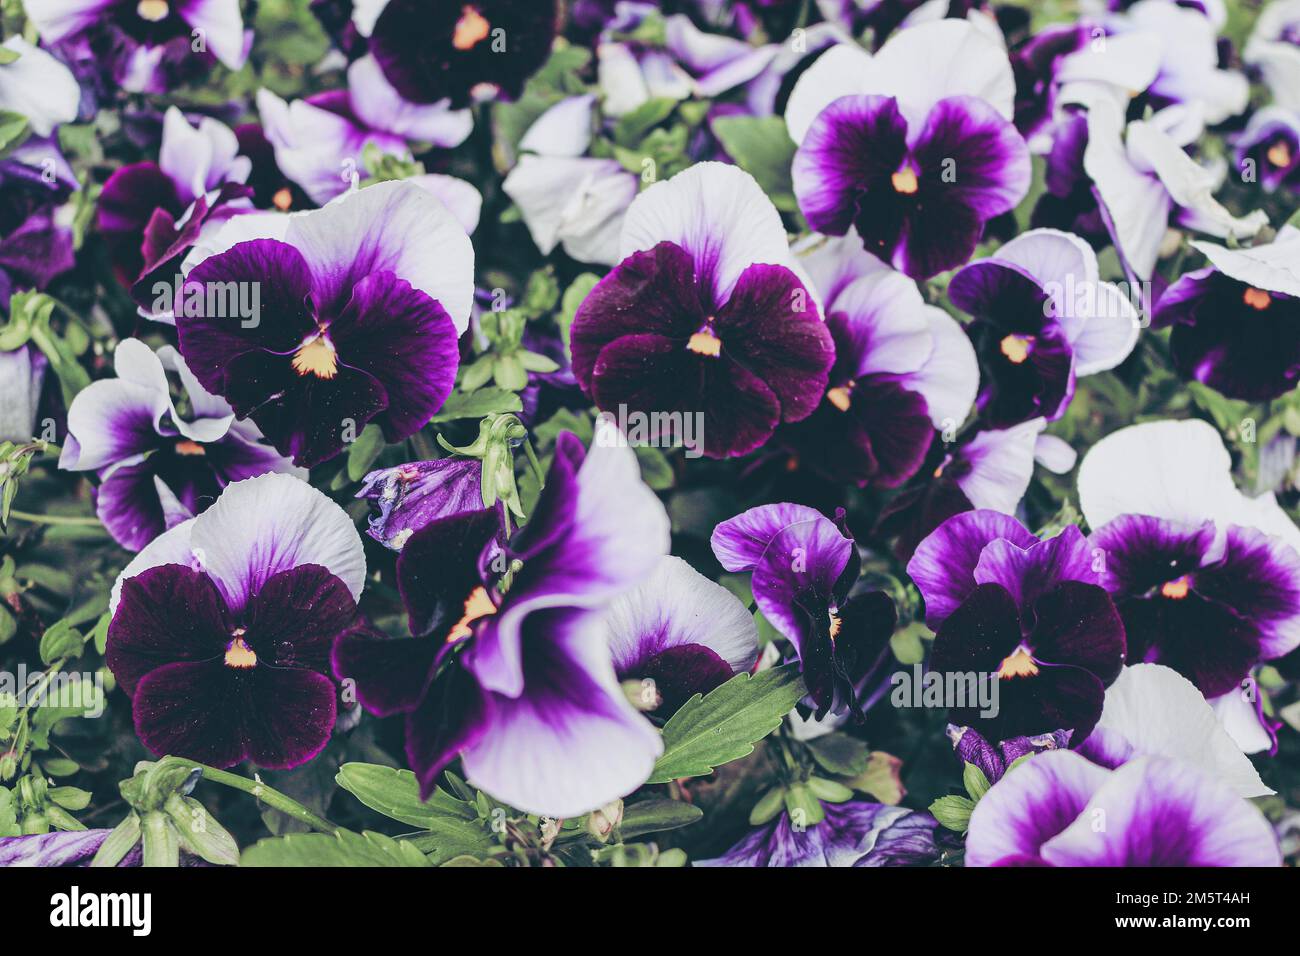 Beautiful pansies in bloom. Photographed at the arboretum in Budapest. Stock Photo